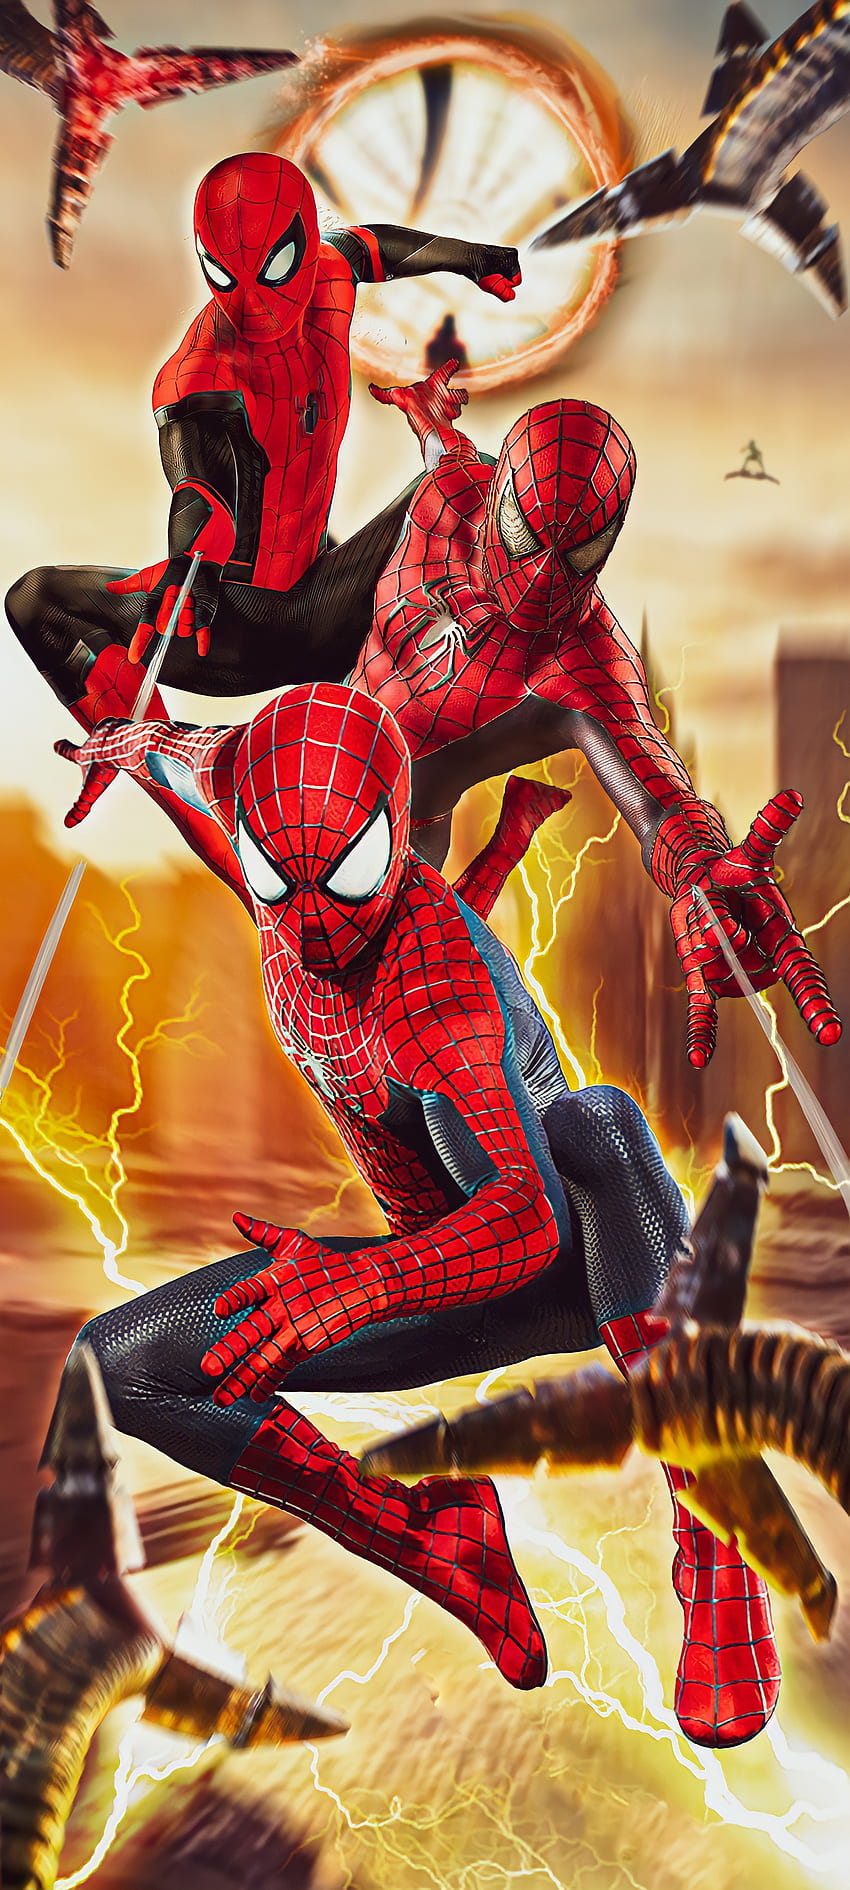 Spider-man No Way Home, Tom holland, Spiderman no way home, Andrew Garfield, Tobey maguire, Marvel, Spiderman HD phone wallpaper